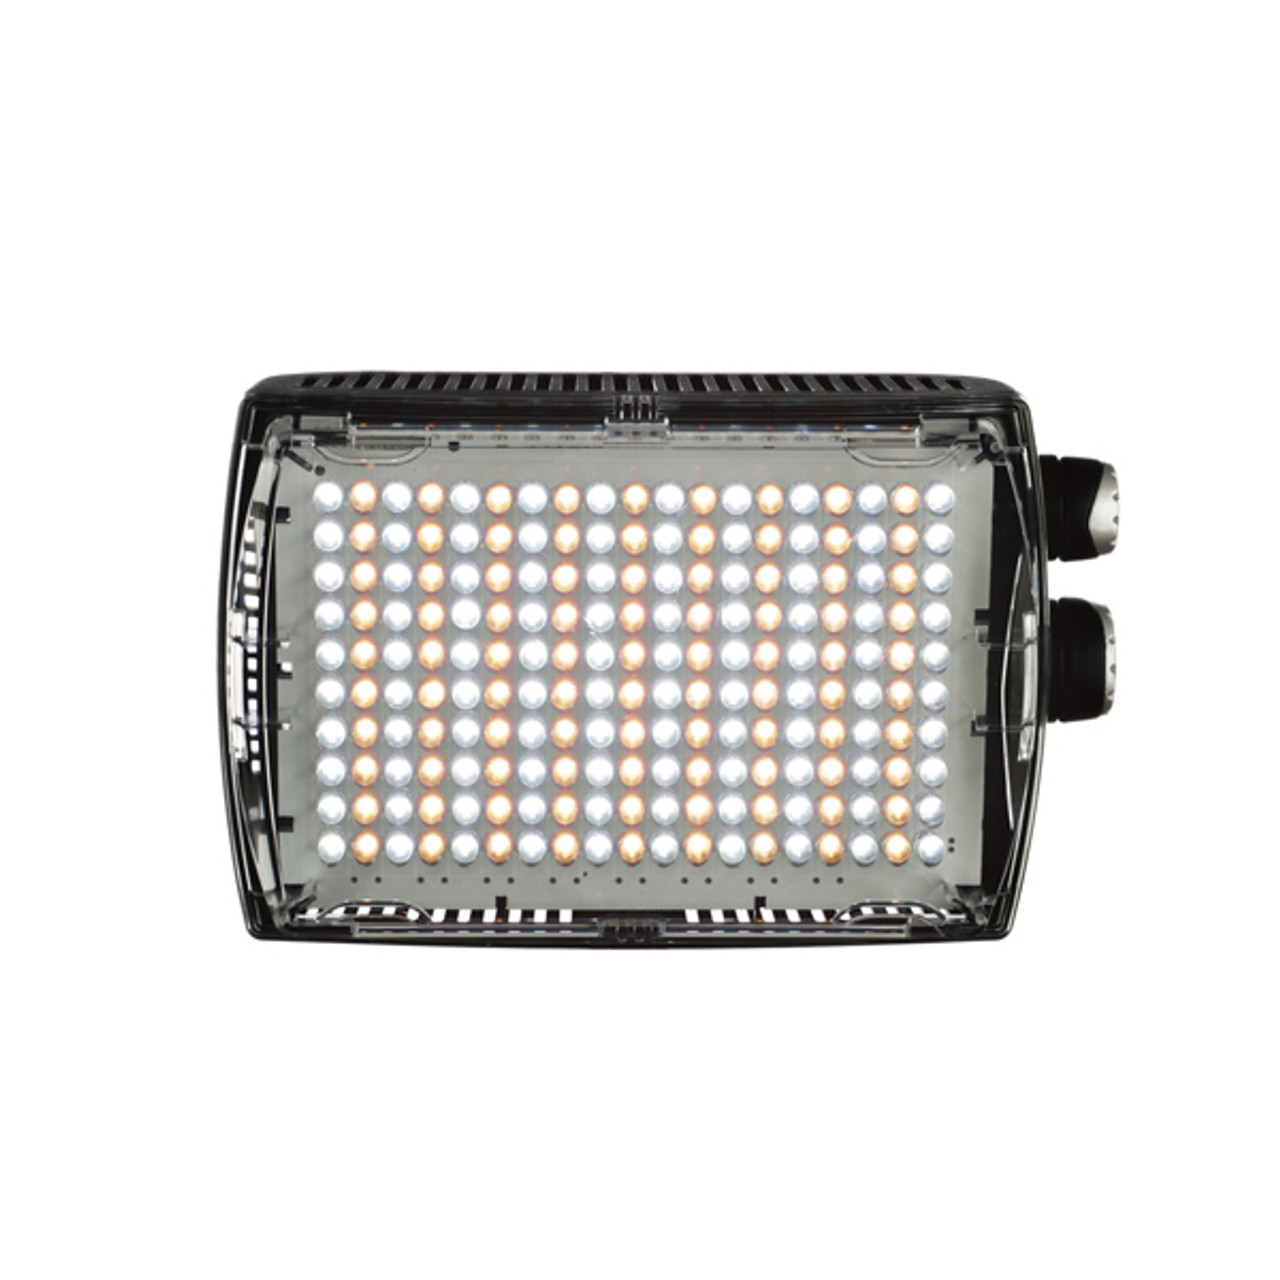 Manfrotto Spectra 900FT LED Light